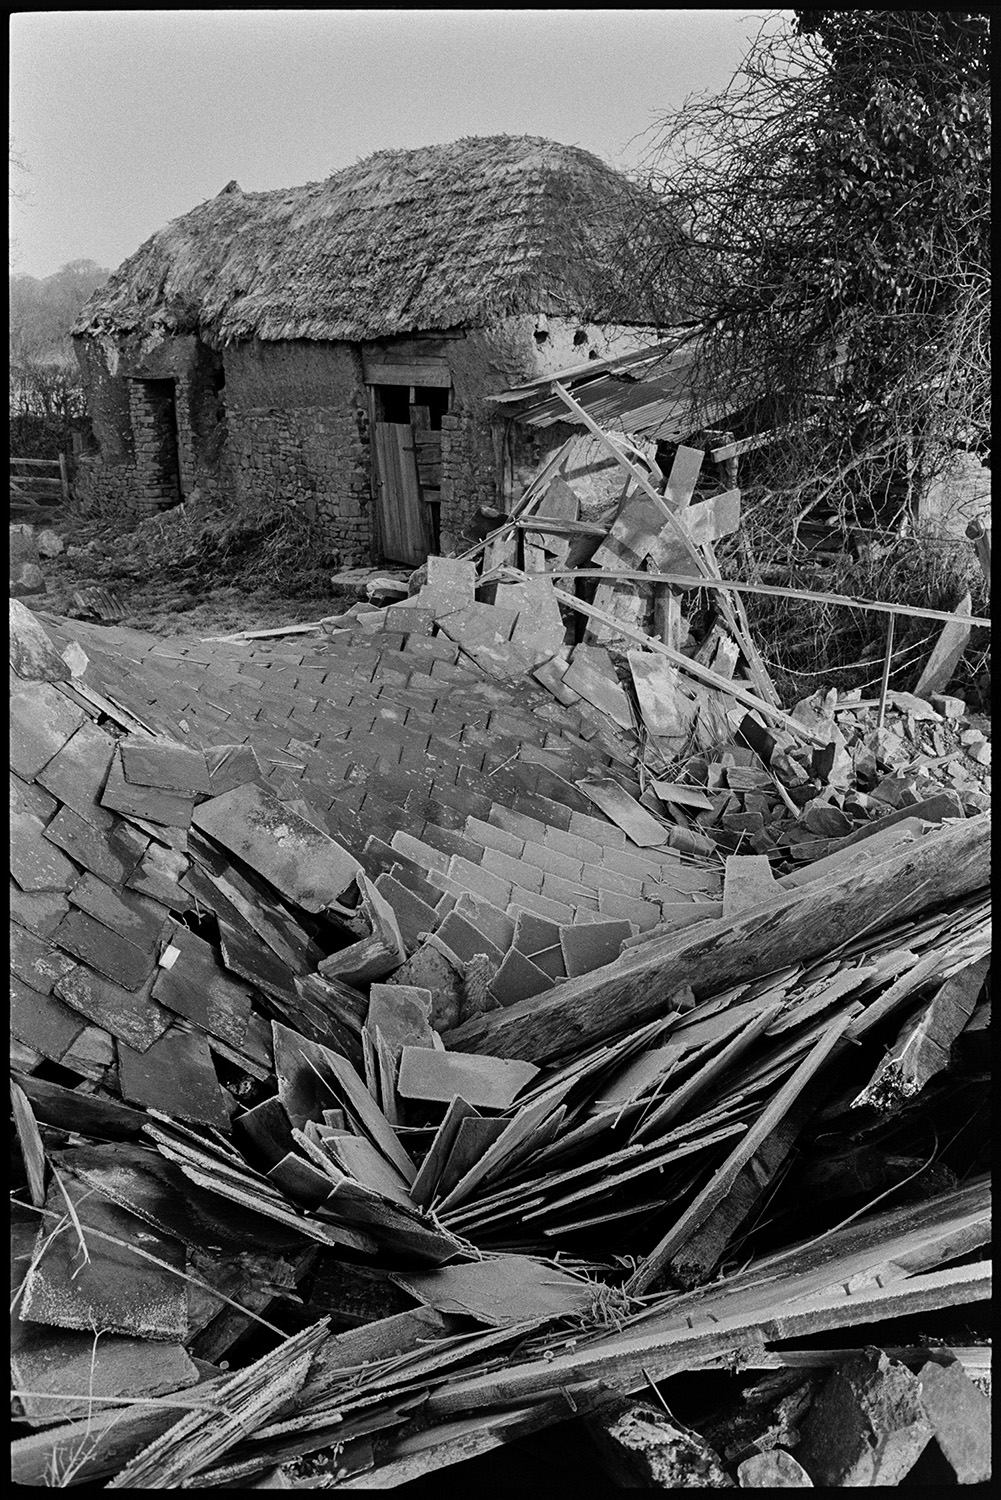 Ruined thatch and cob barns, with views from nearby stream, trees.
[A run down cob and thatch barn at Middle Week, Iddesleigh, behind a pile of fallen slates and timbers.]